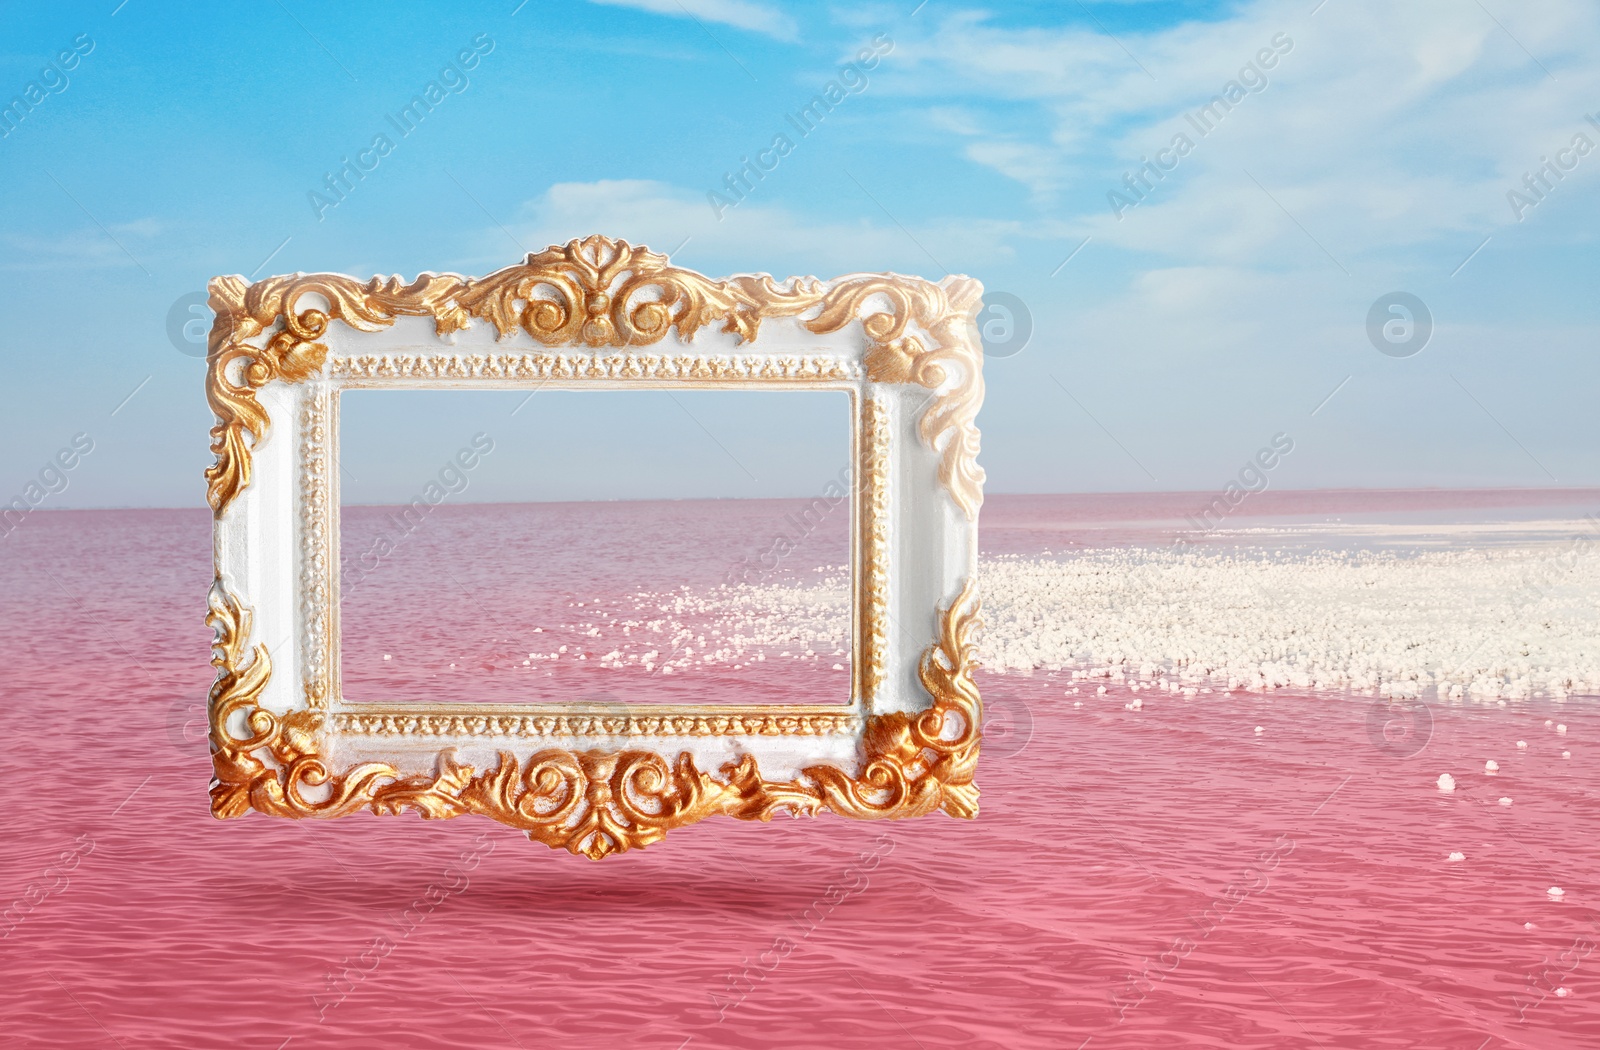 Image of Vintage frame and beautiful pink lake under blue sky with clouds